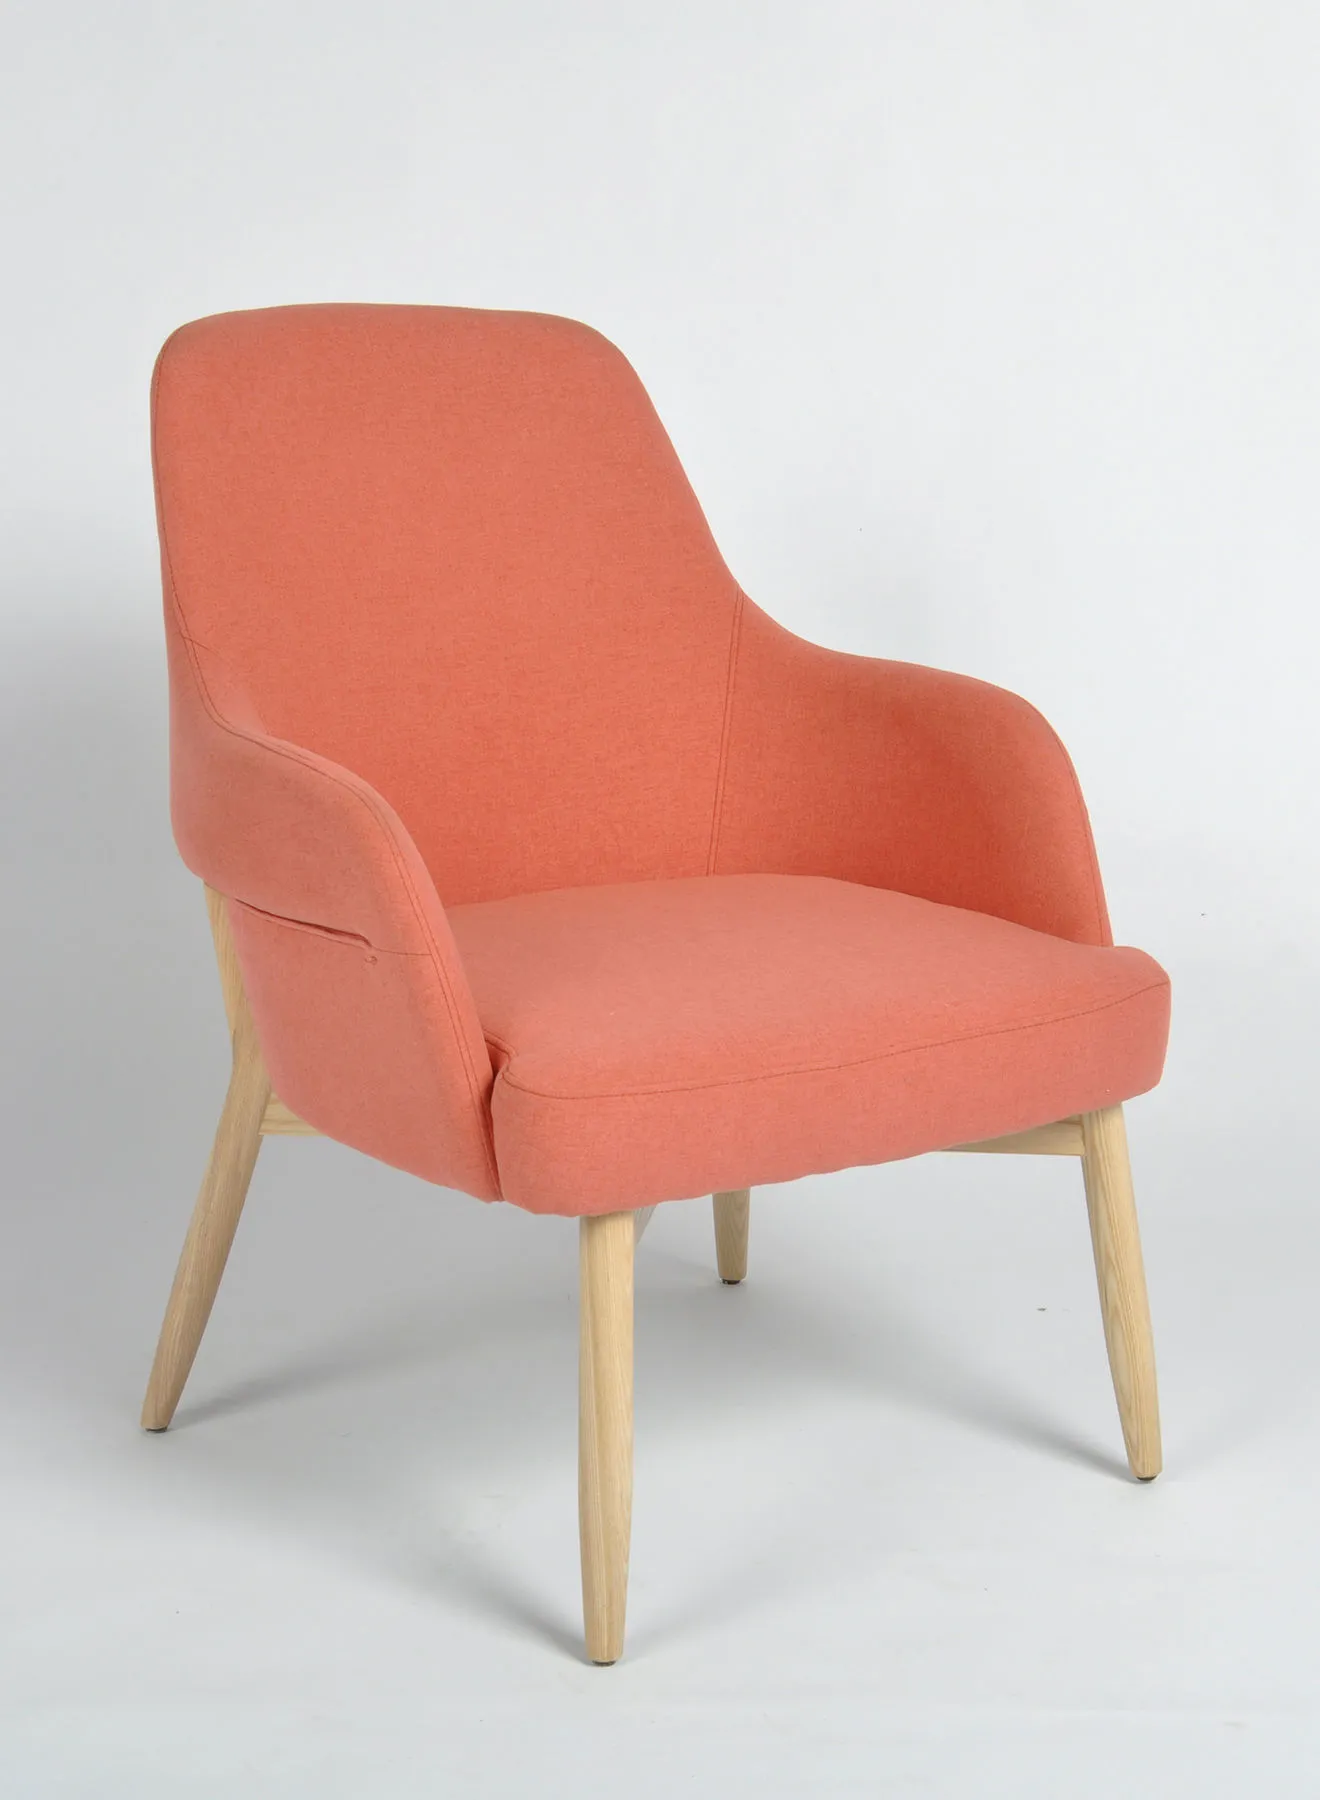 Switch Armchair In Red Wooden Chair Size 68 X 78 X 86.5